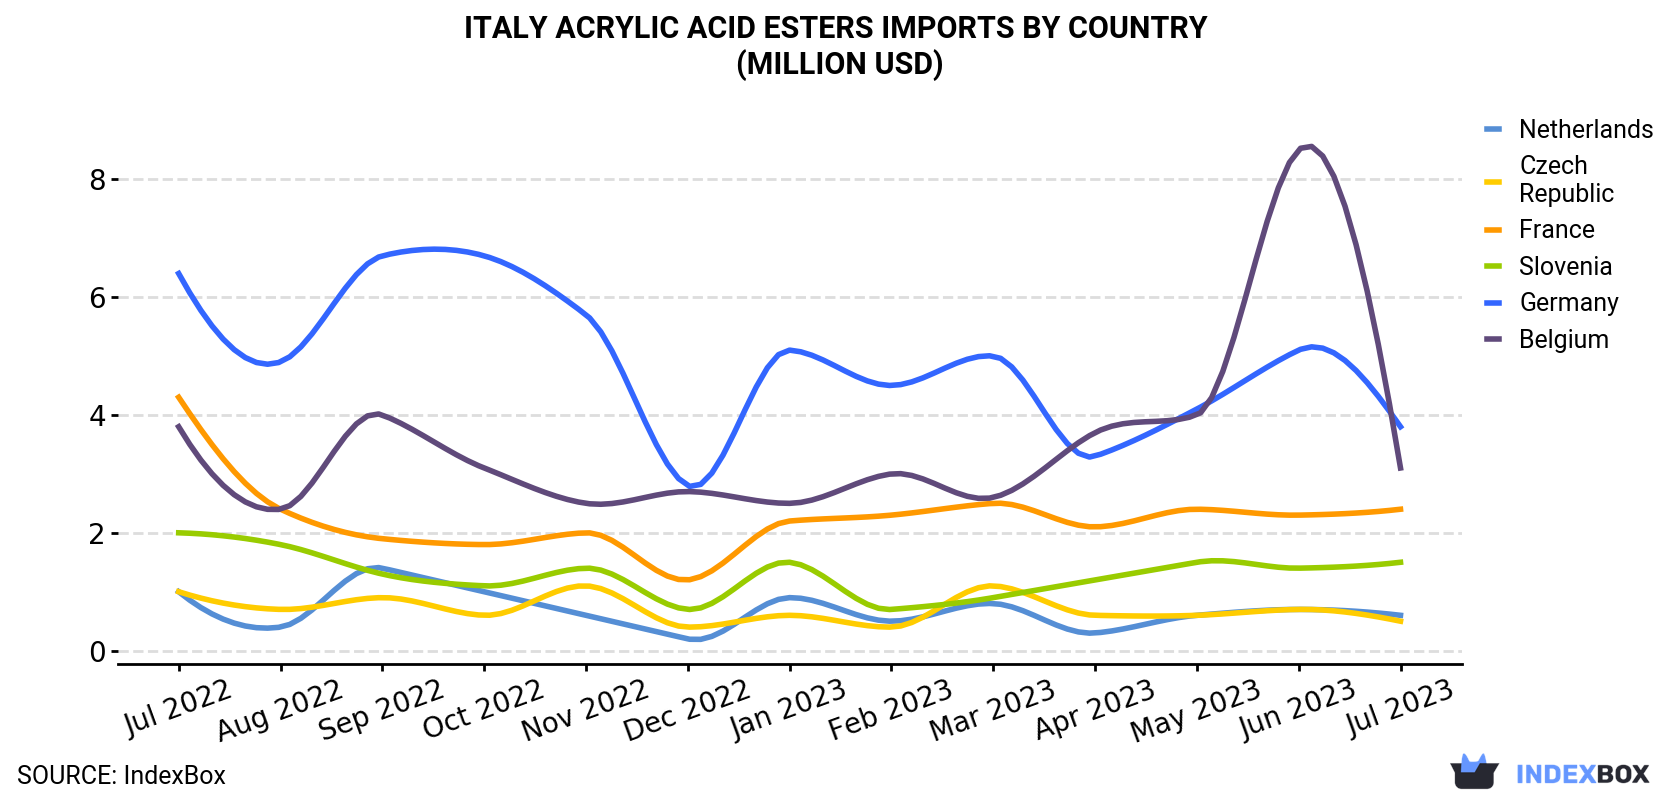 Italy Acrylic Acid Esters Imports By Country (Million USD)